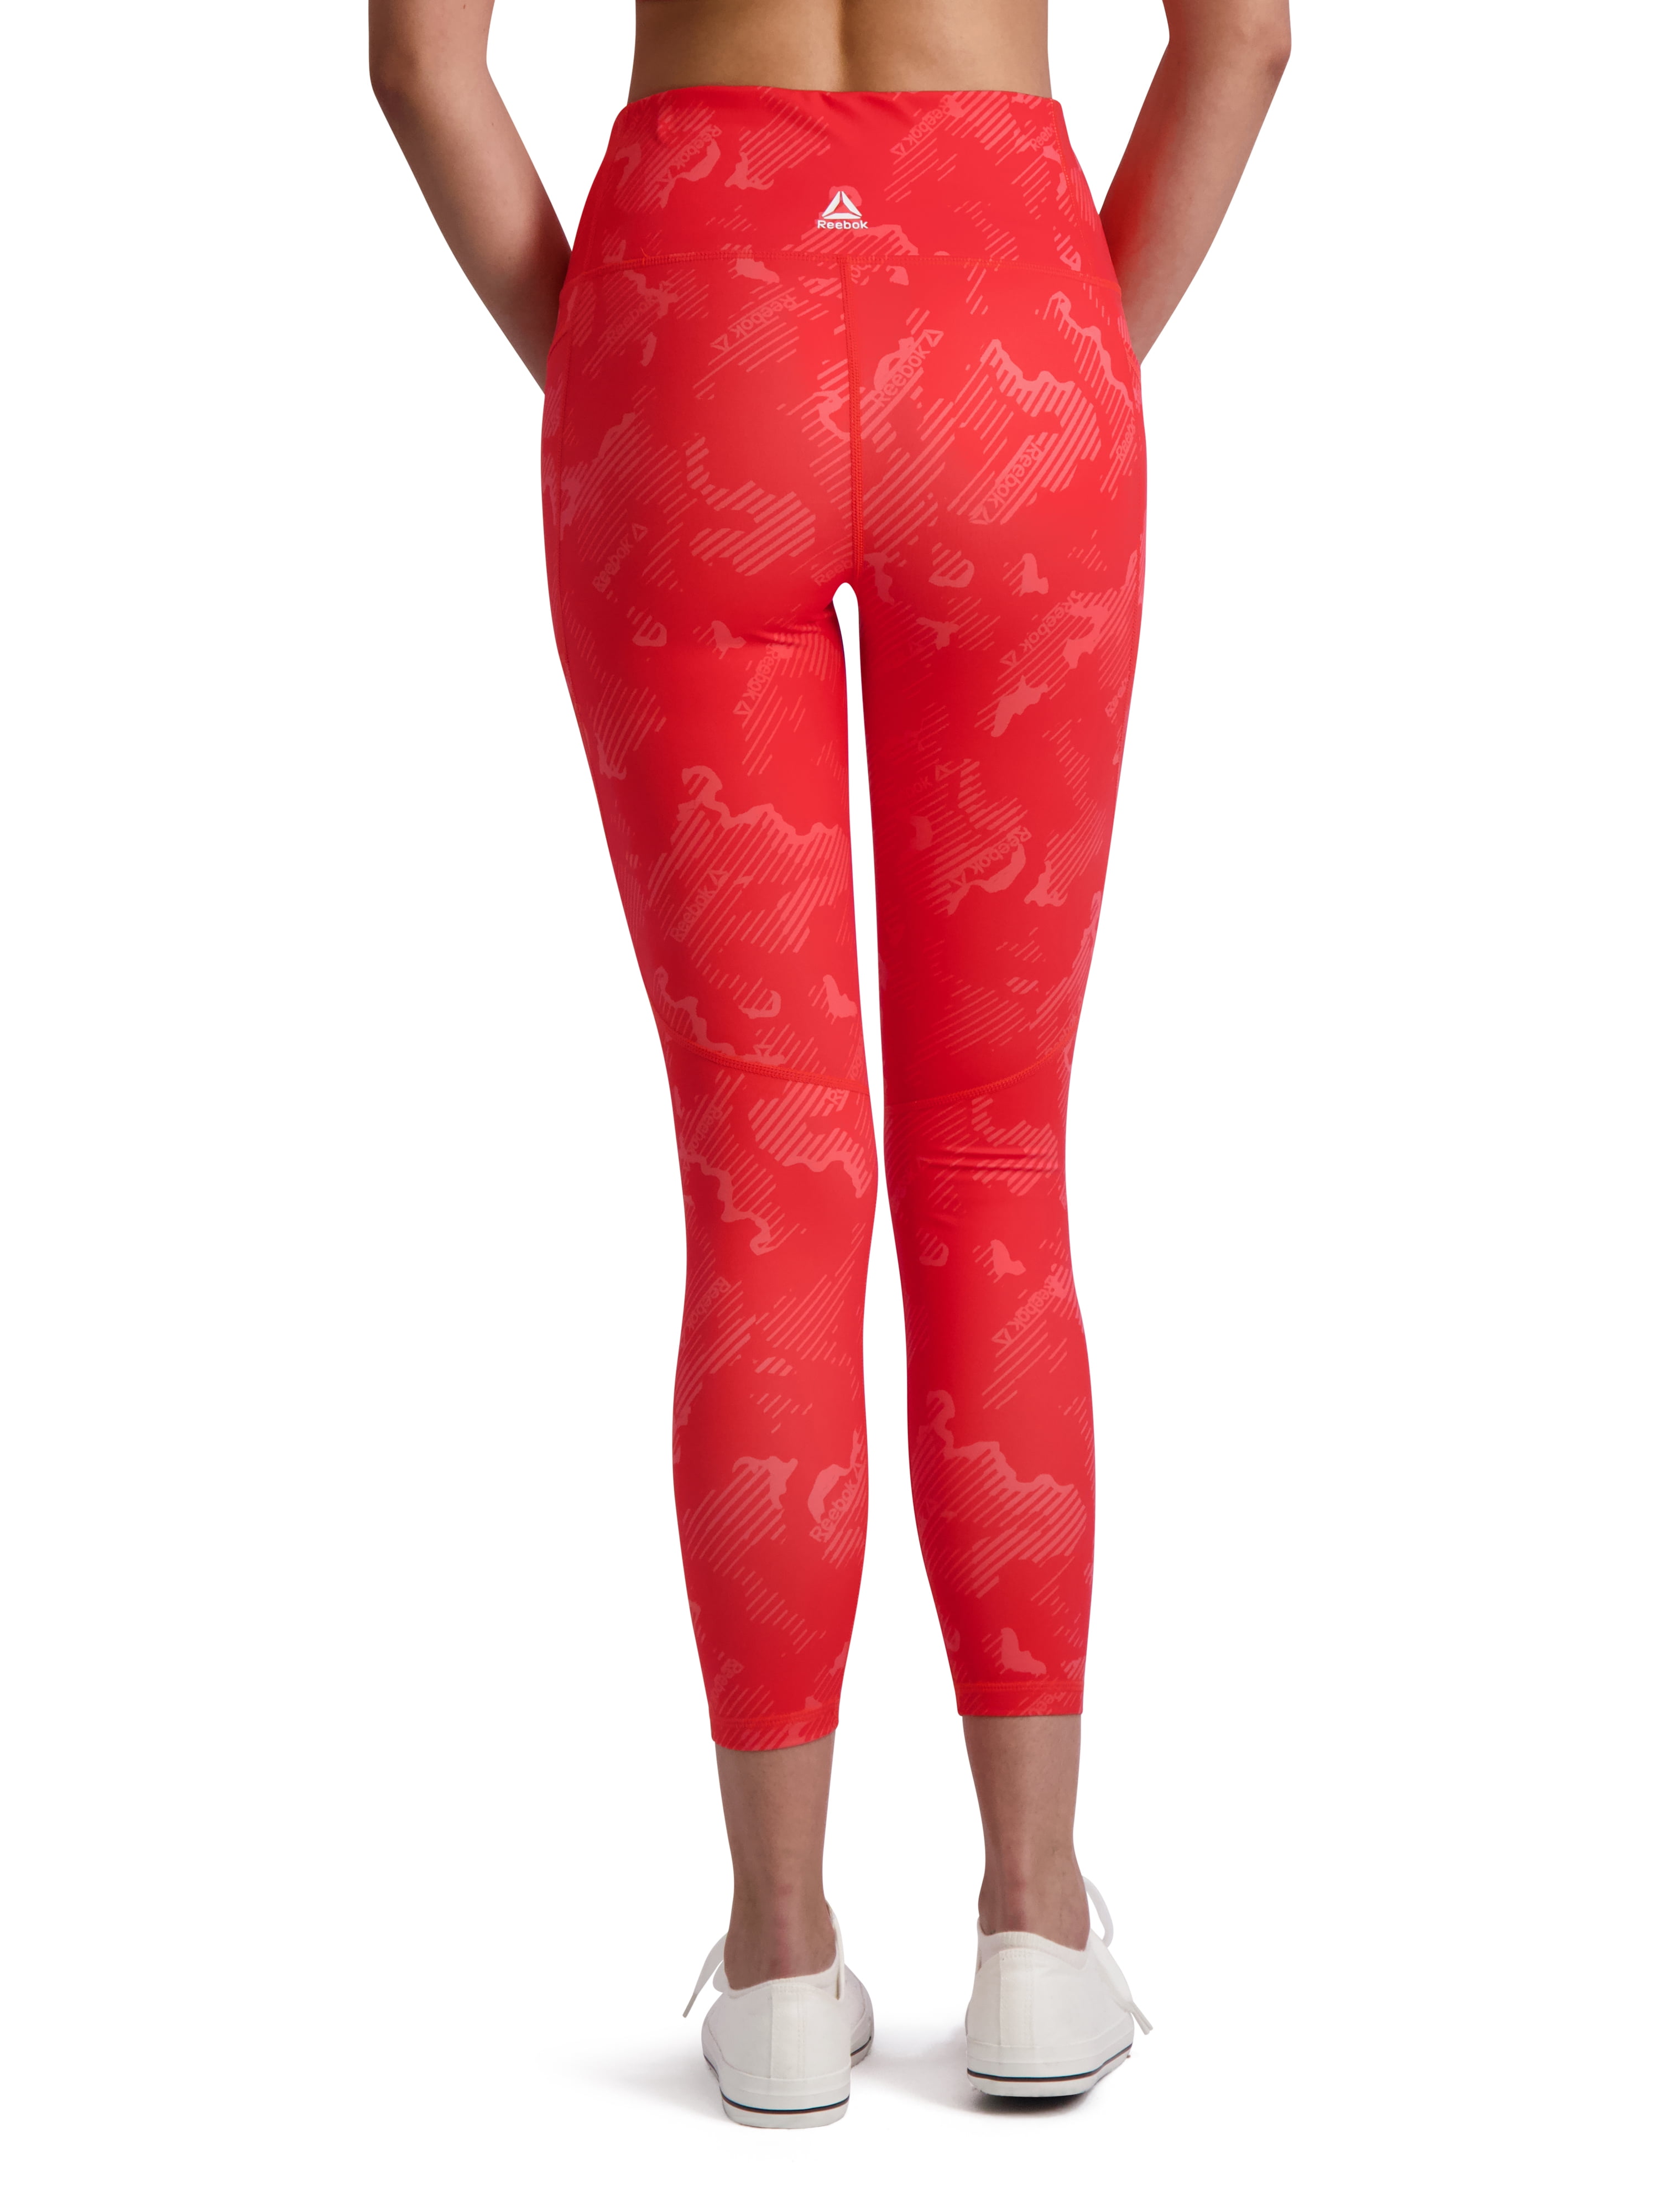 Women's Printed Highrise Legging with 25" Inseam and Side Zipper Pocket - Walmart.com